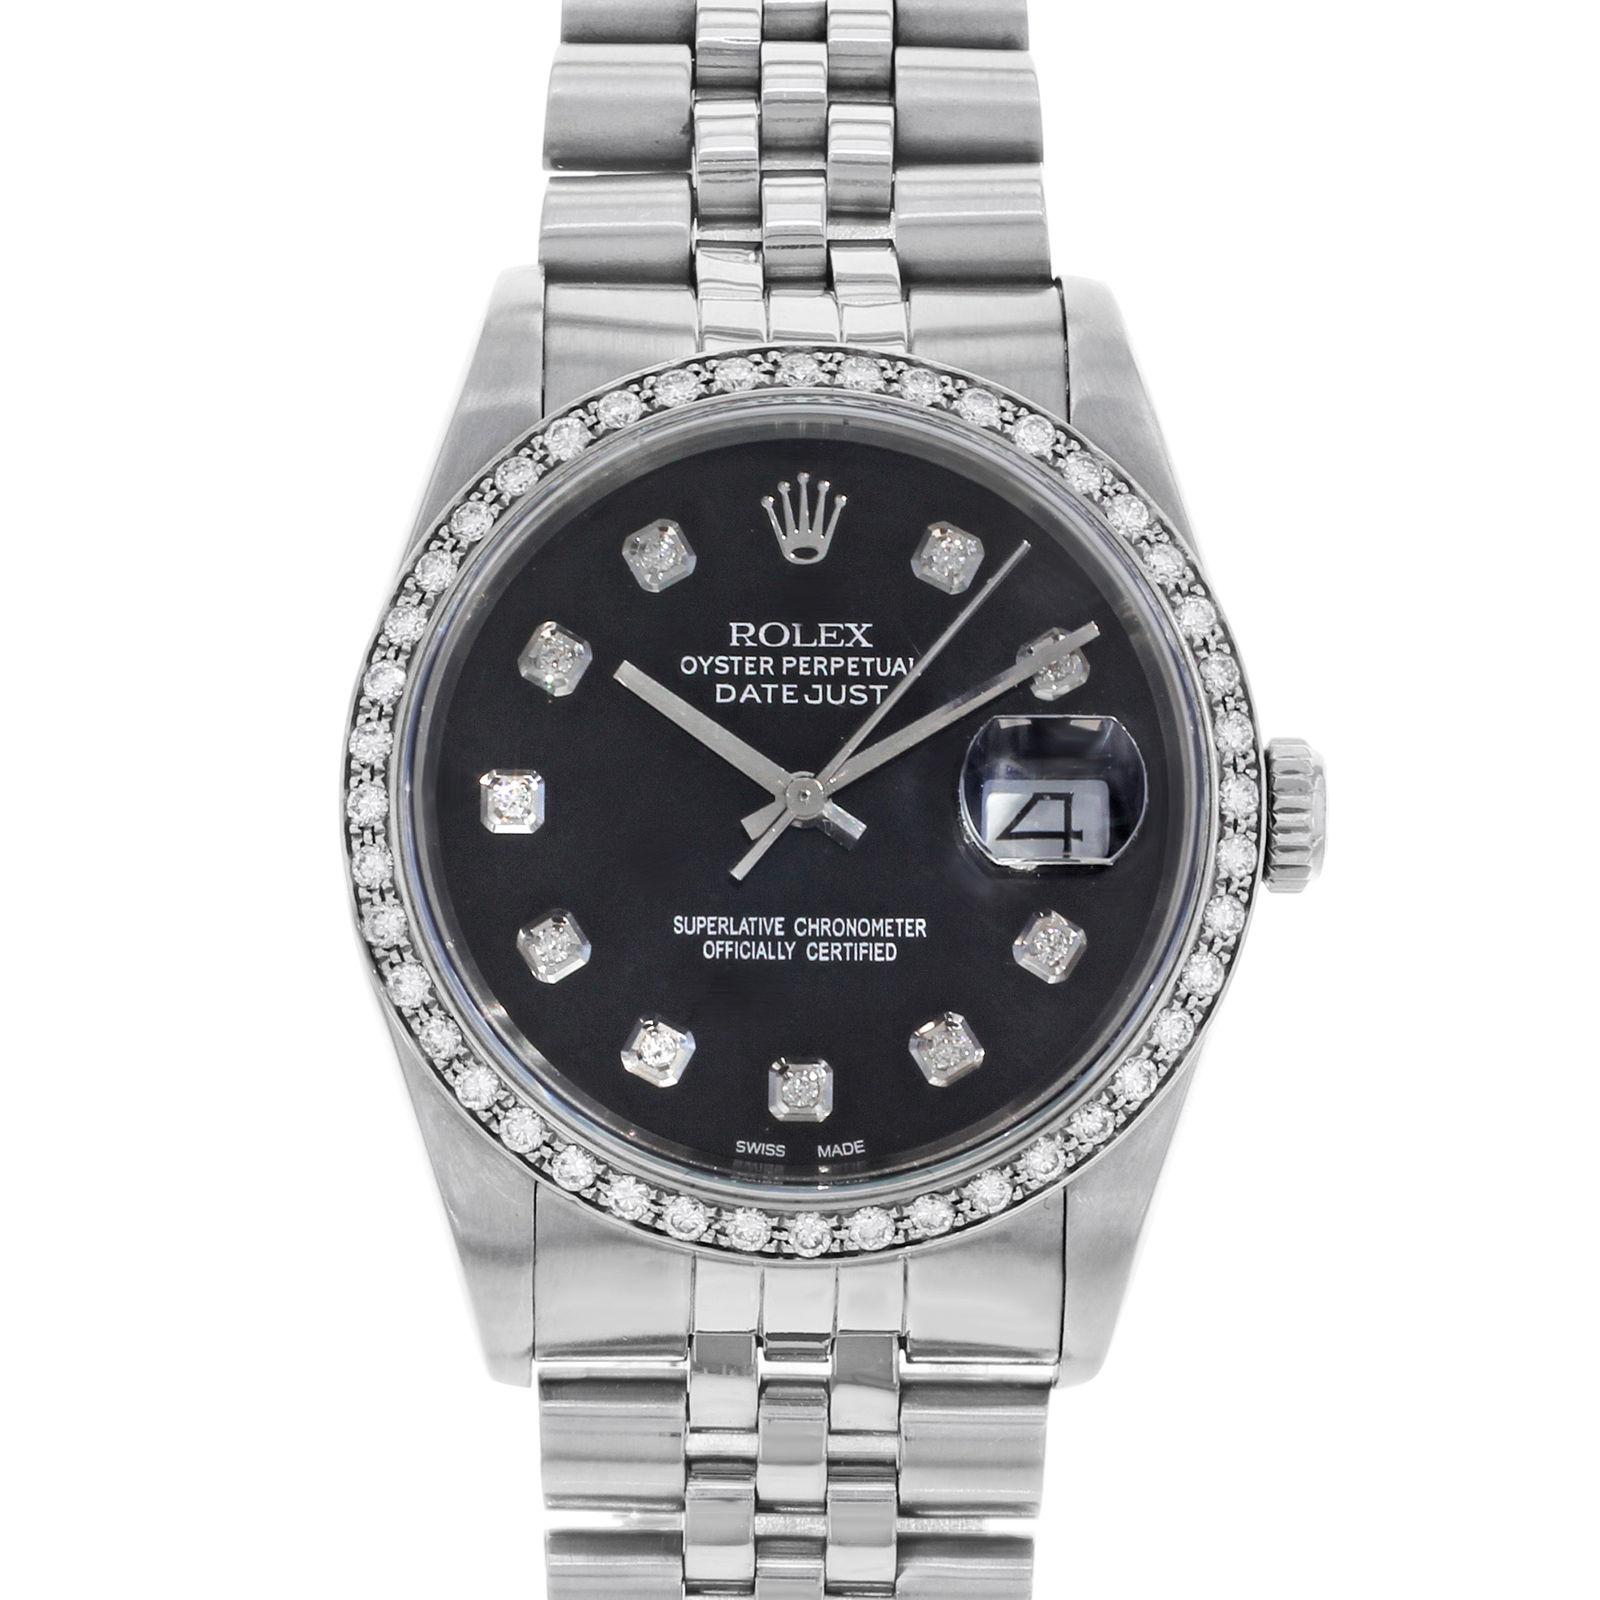 (20760)
This pre-owned Rolex Datejust 16234 is a beautiful men's timepiece that is powered by an automatic movement which is cased in a stainless steel case. It has a round shape face, date, diamonds dial and has hand diamonds style markers. It is